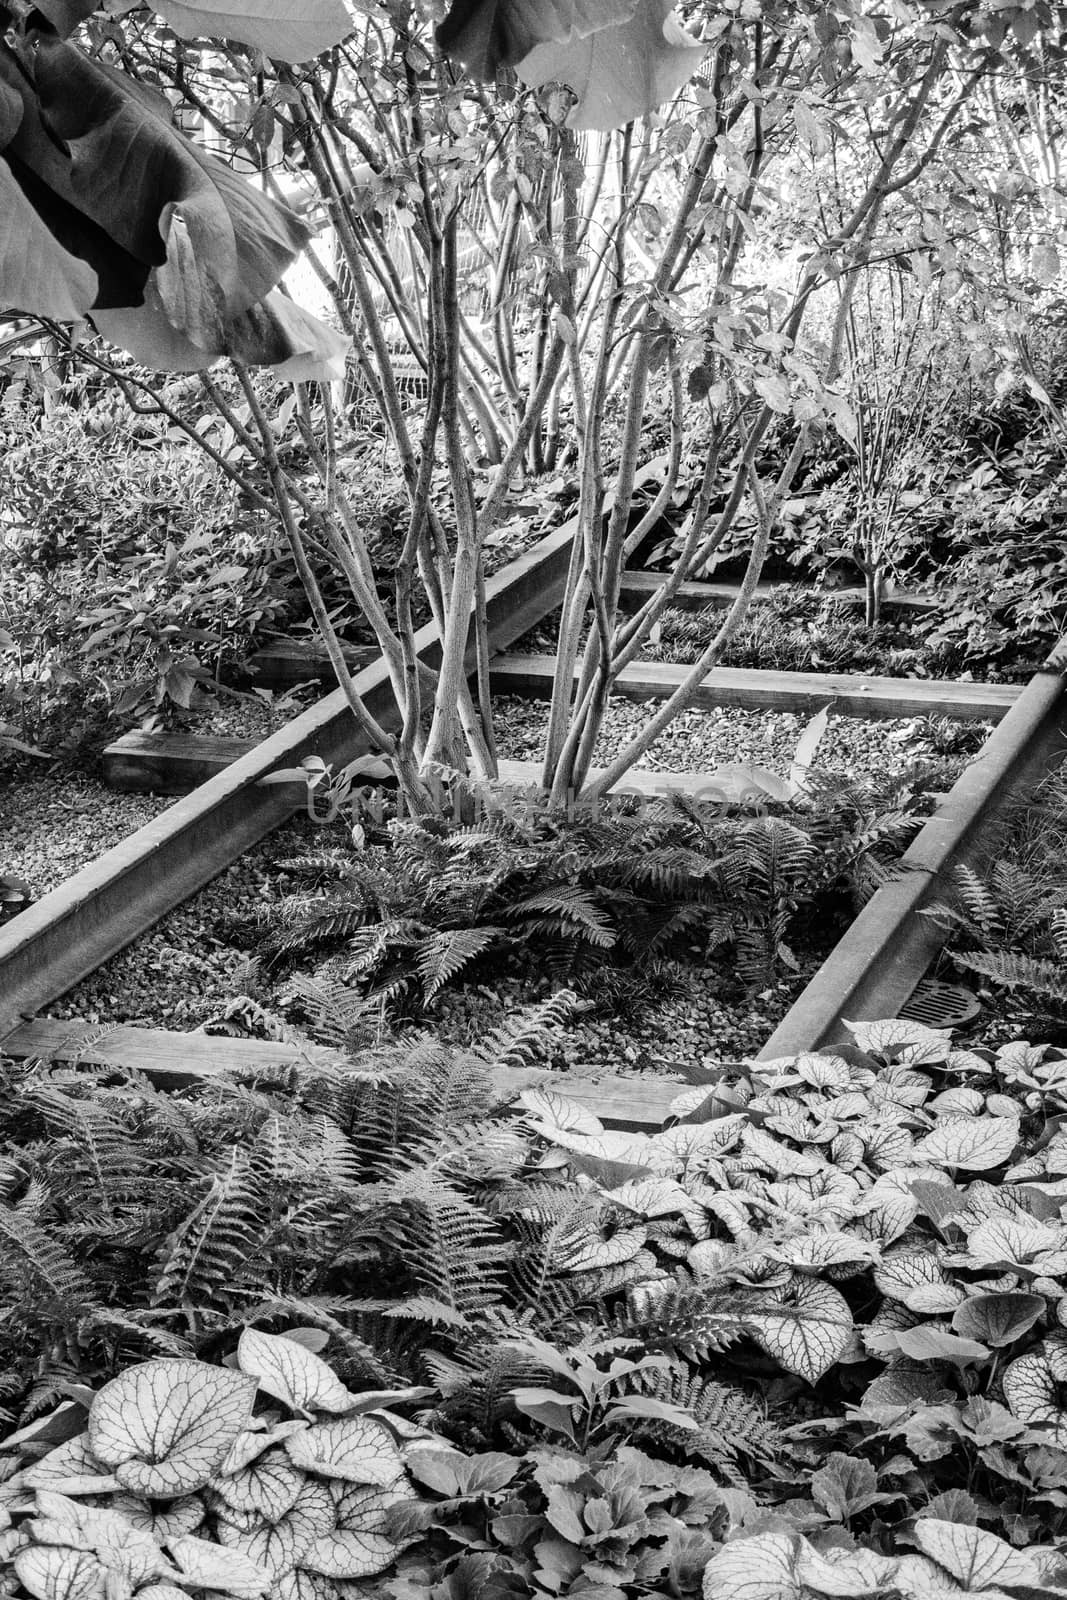 Many plants growing between old railroad tracks in New York black and white